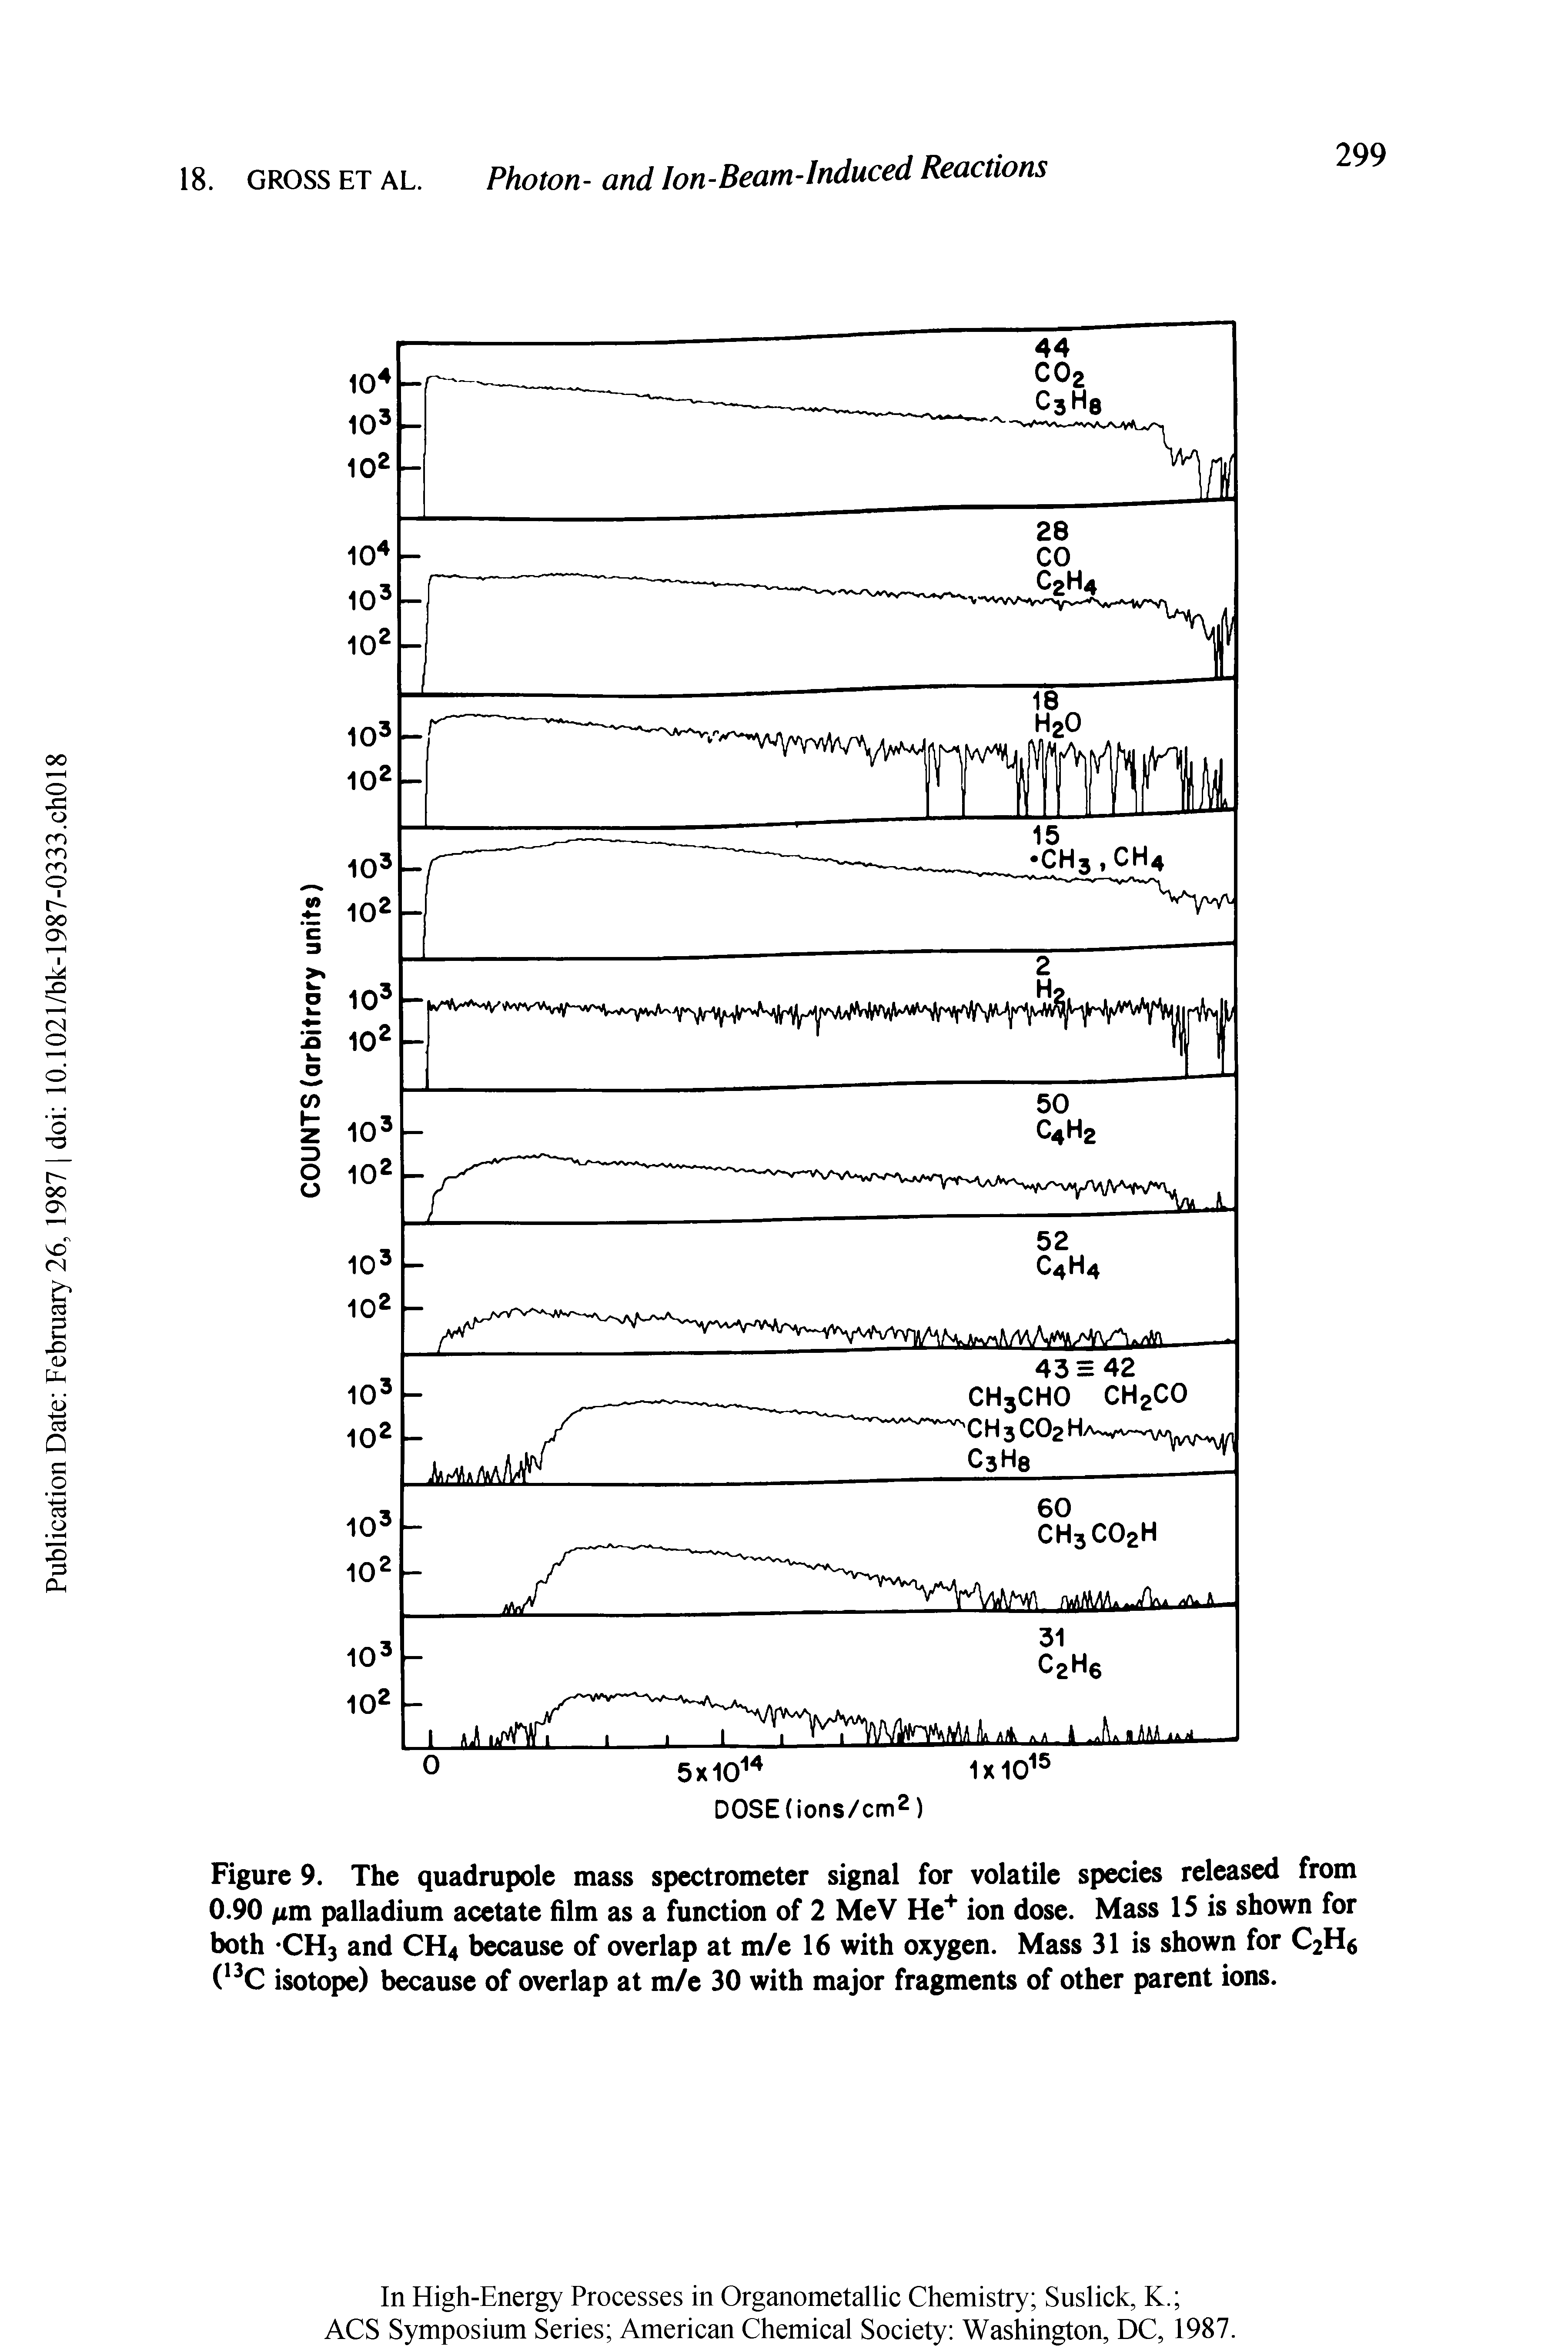 Figure 9. The quadrupole mass spectrometer signal for volatile species released from 0.90 nm palladium acetate film as a function of 2 MeV He+ ion dose. Mass 15 is shown for both CH3 and CH4 because of overlap at m/e 16 with oxygen. Mass 31 is shown for C2H6 (13C isotope) because of overlap at m/e 30 with major fragments of other parent ions.